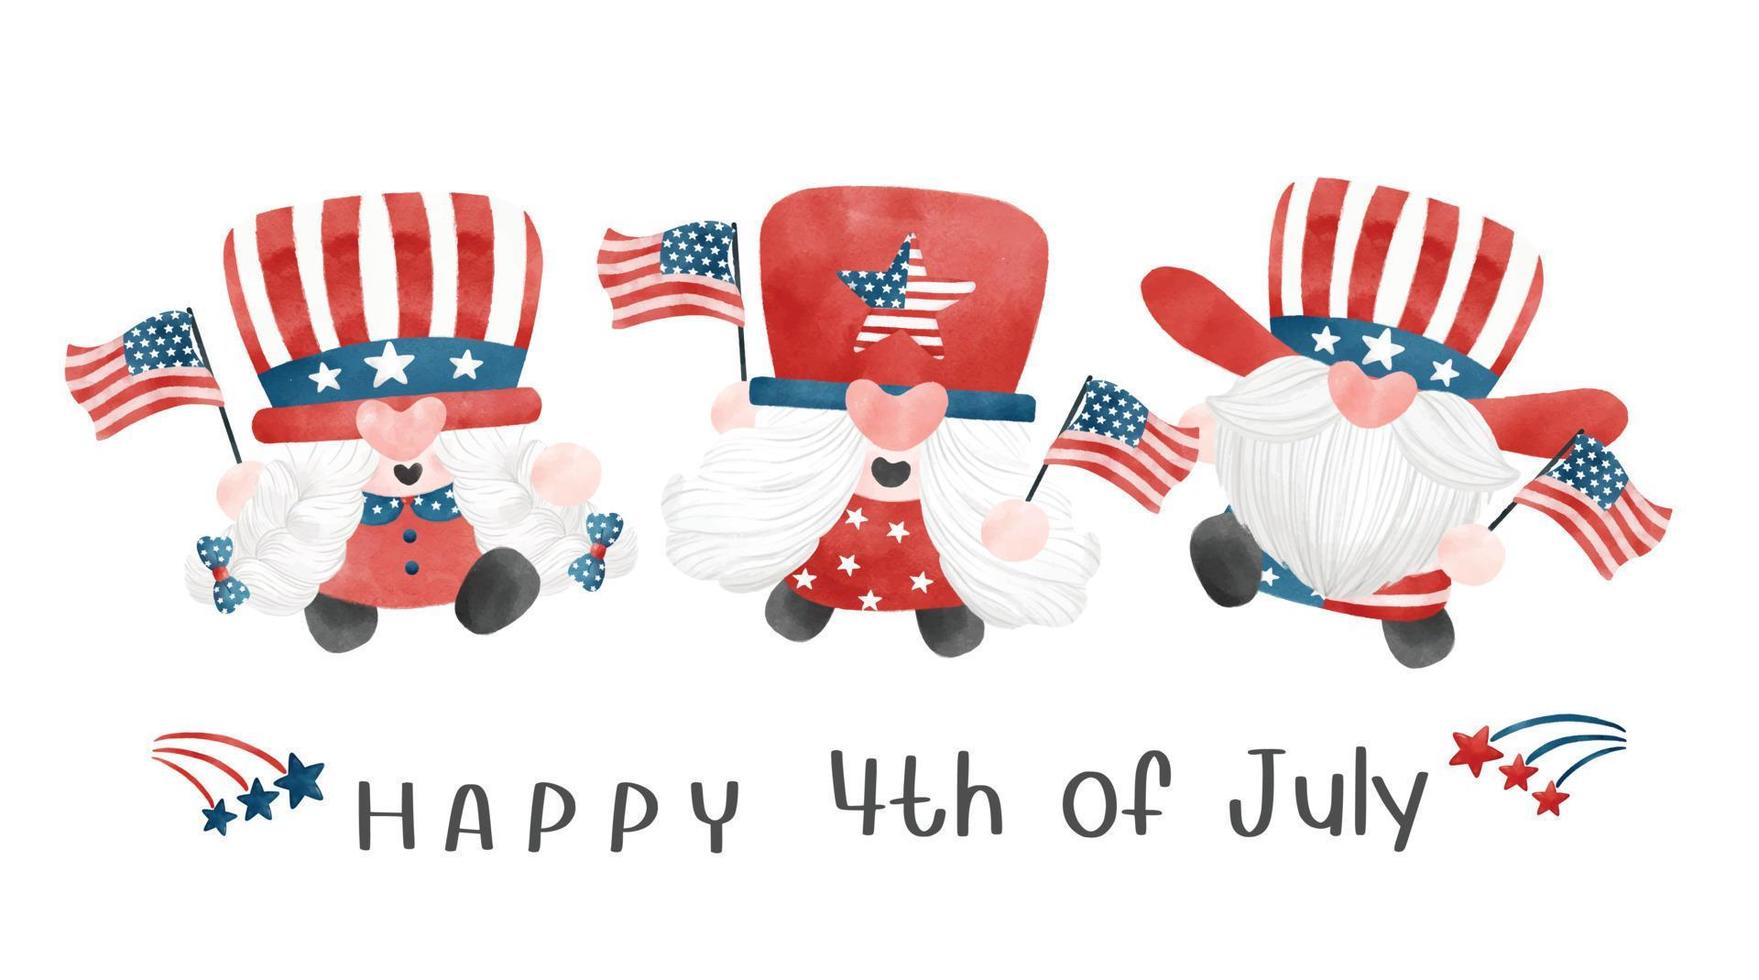 4th of July Gnome Patriotic celebrating America Independence day cartoon watercolor illustration vector